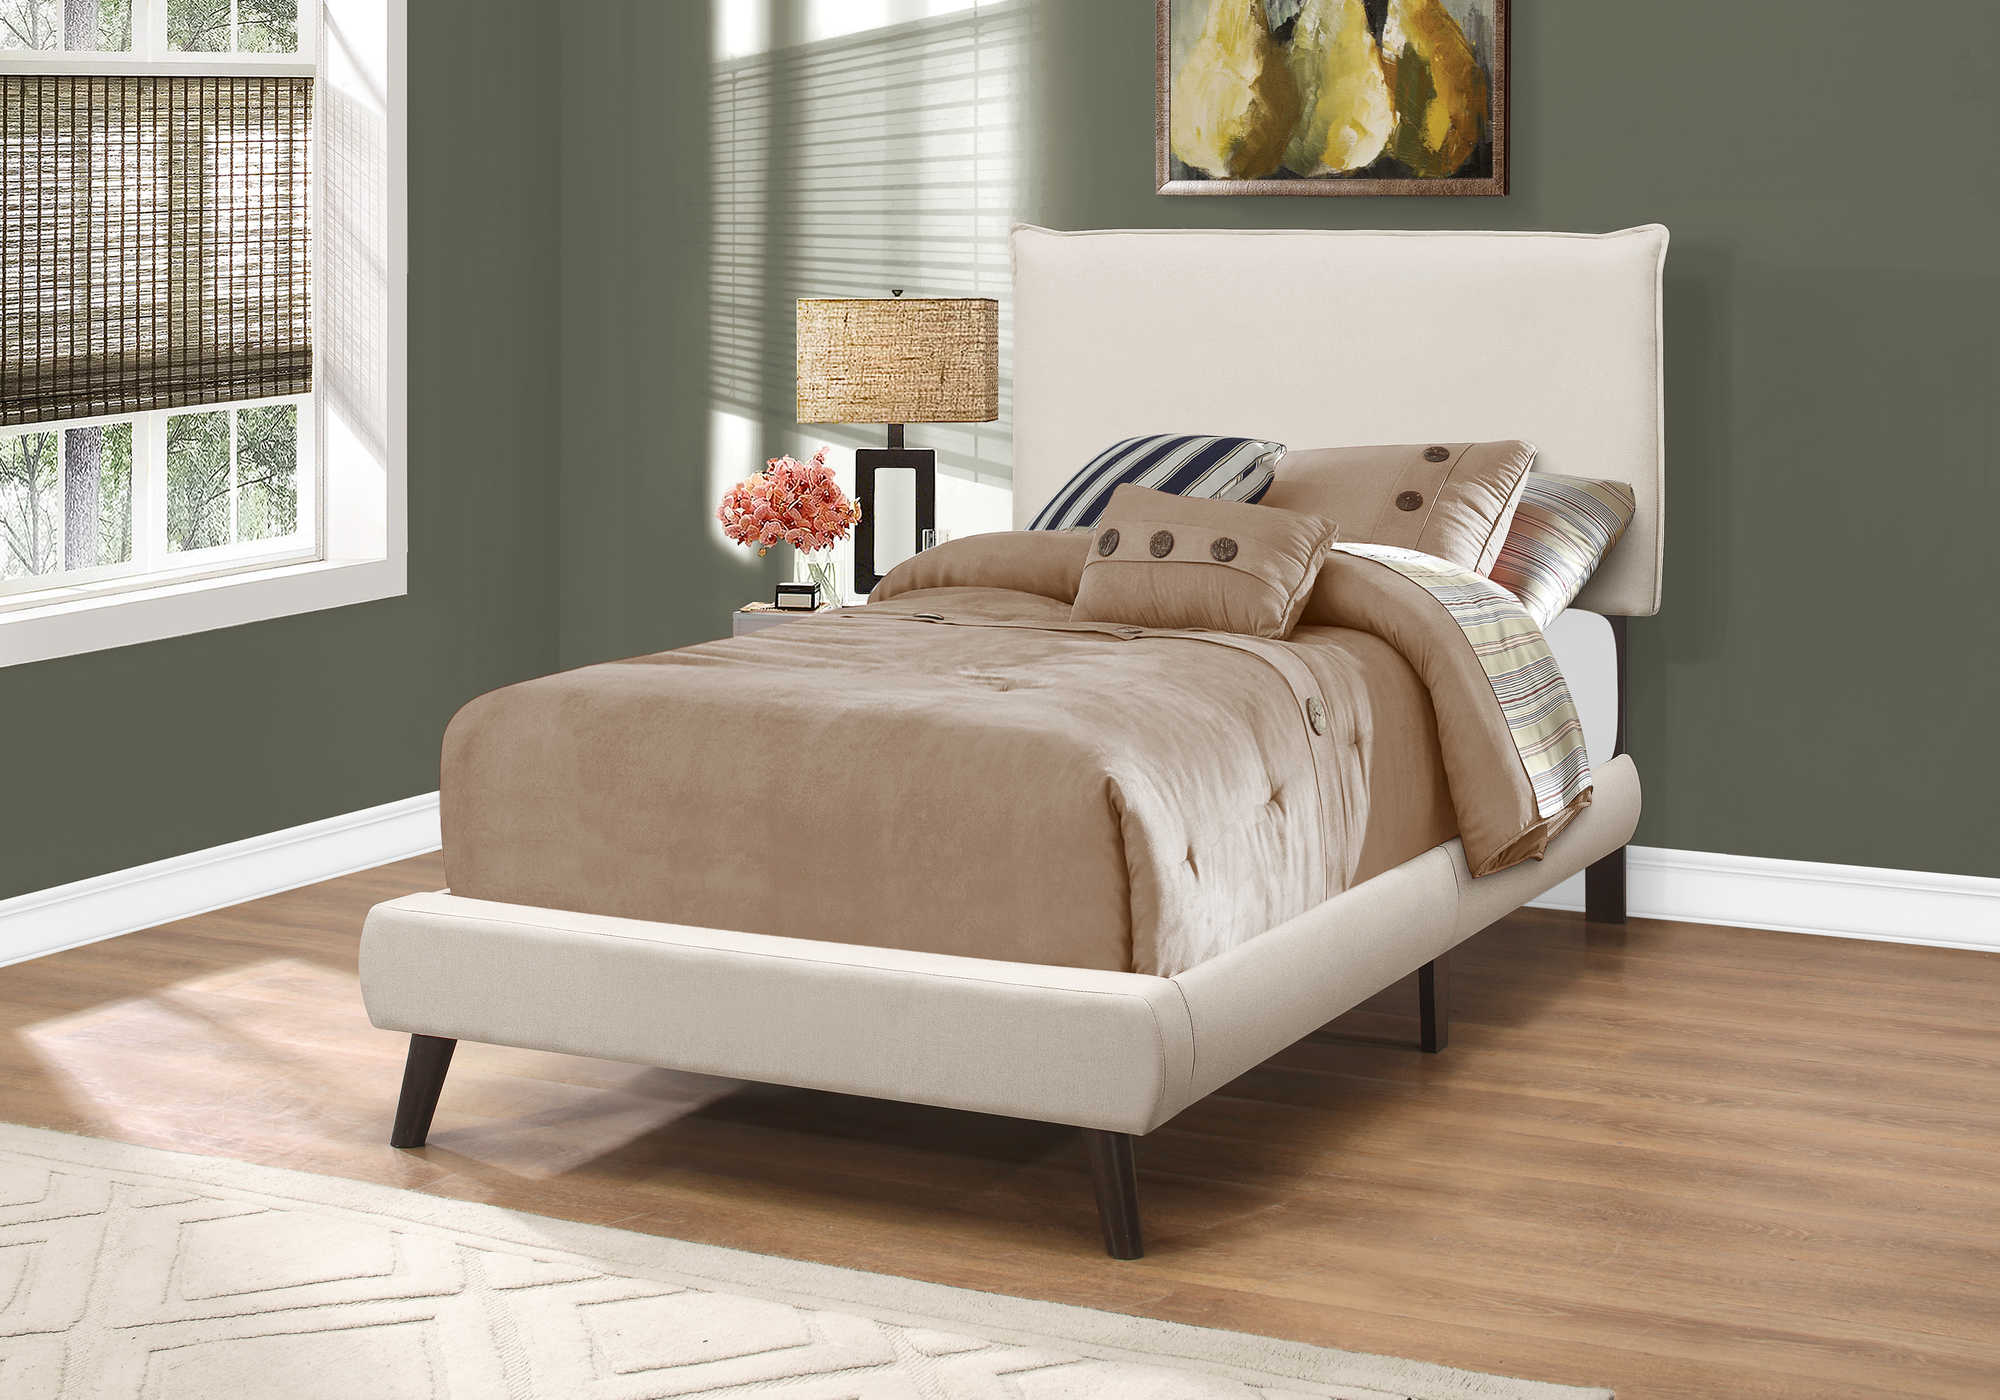 BED - TWIN SIZE / BEIGE LINEN WITH BROWN WOOD LEGS